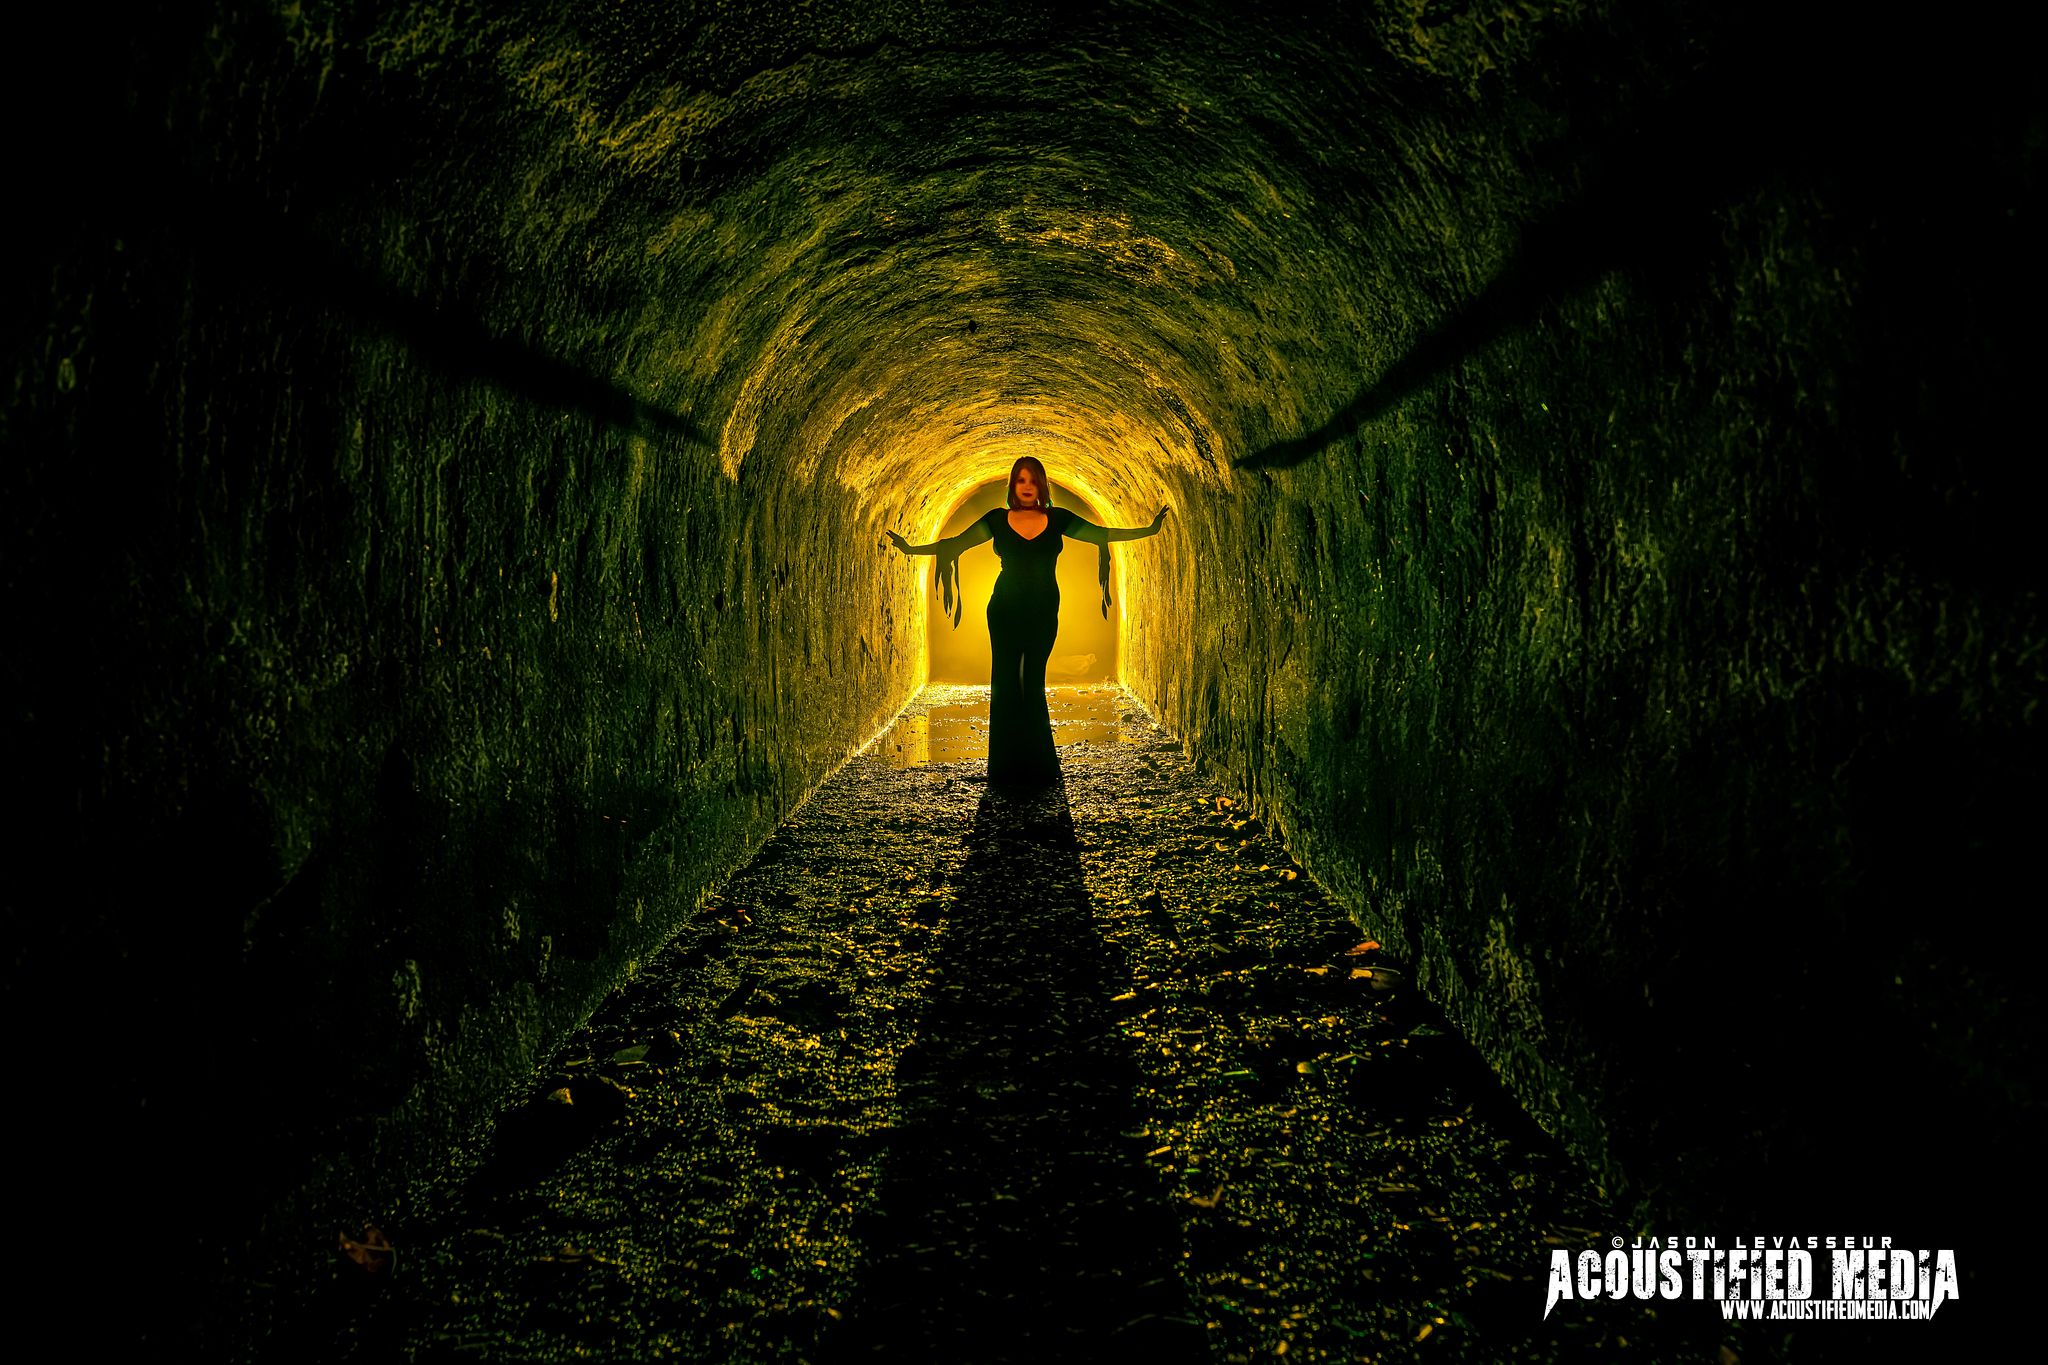 Photoshoot in "The Tunnel"